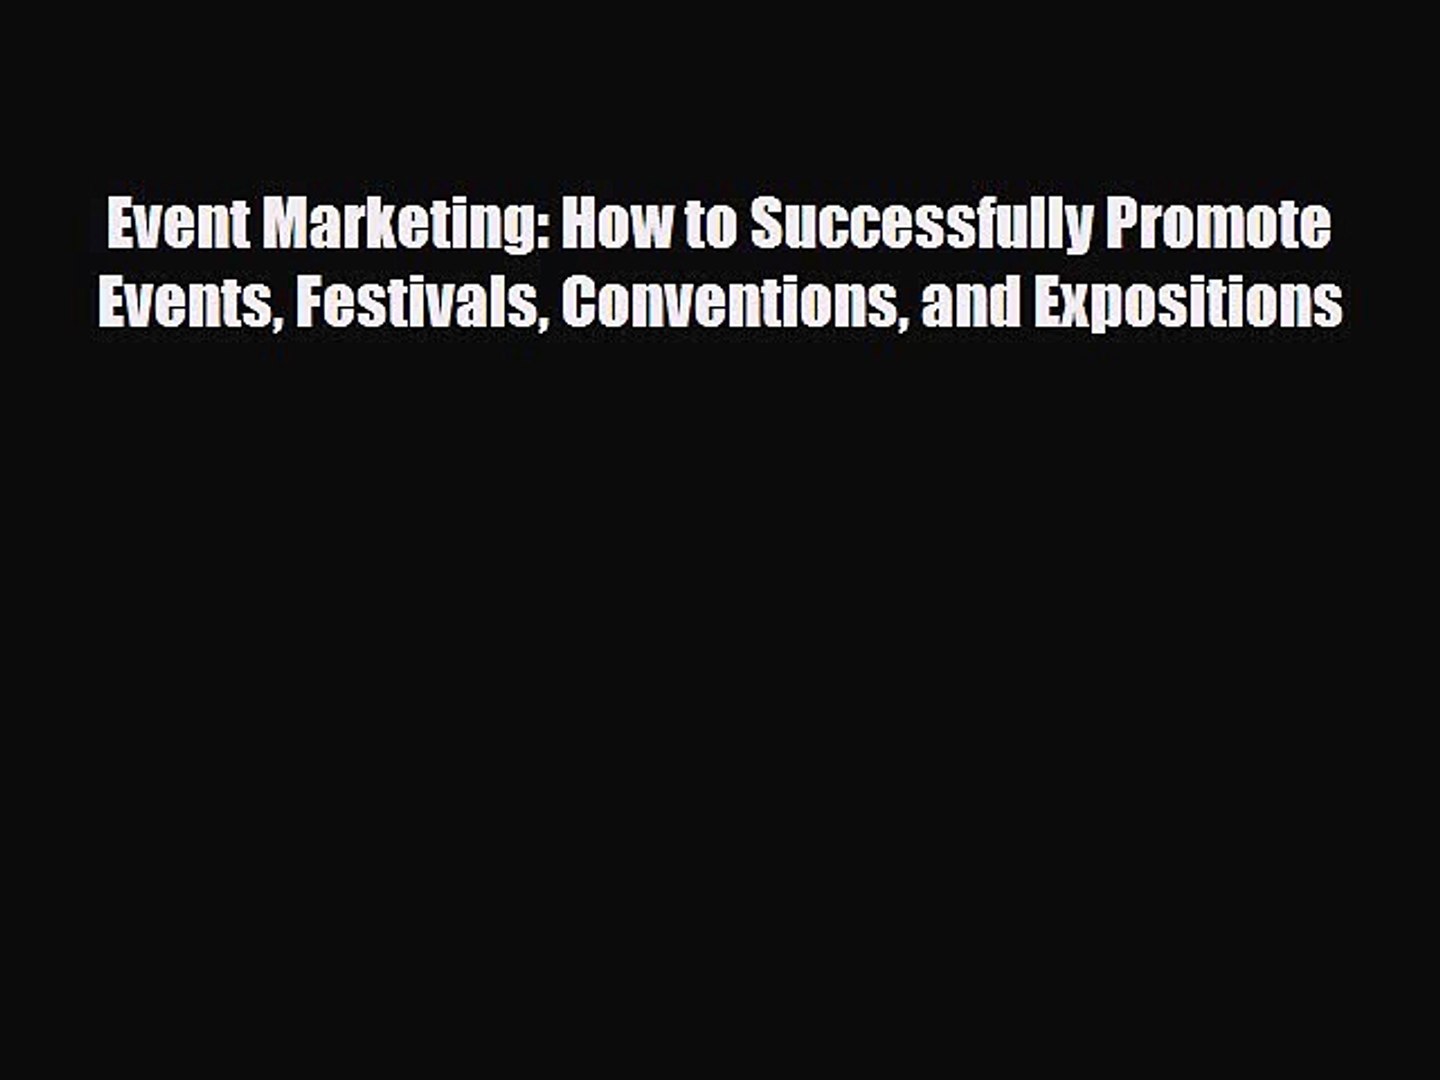 [PDF] Event Marketing: How to Successfully Promote Events Festivals Conventions and Expositions